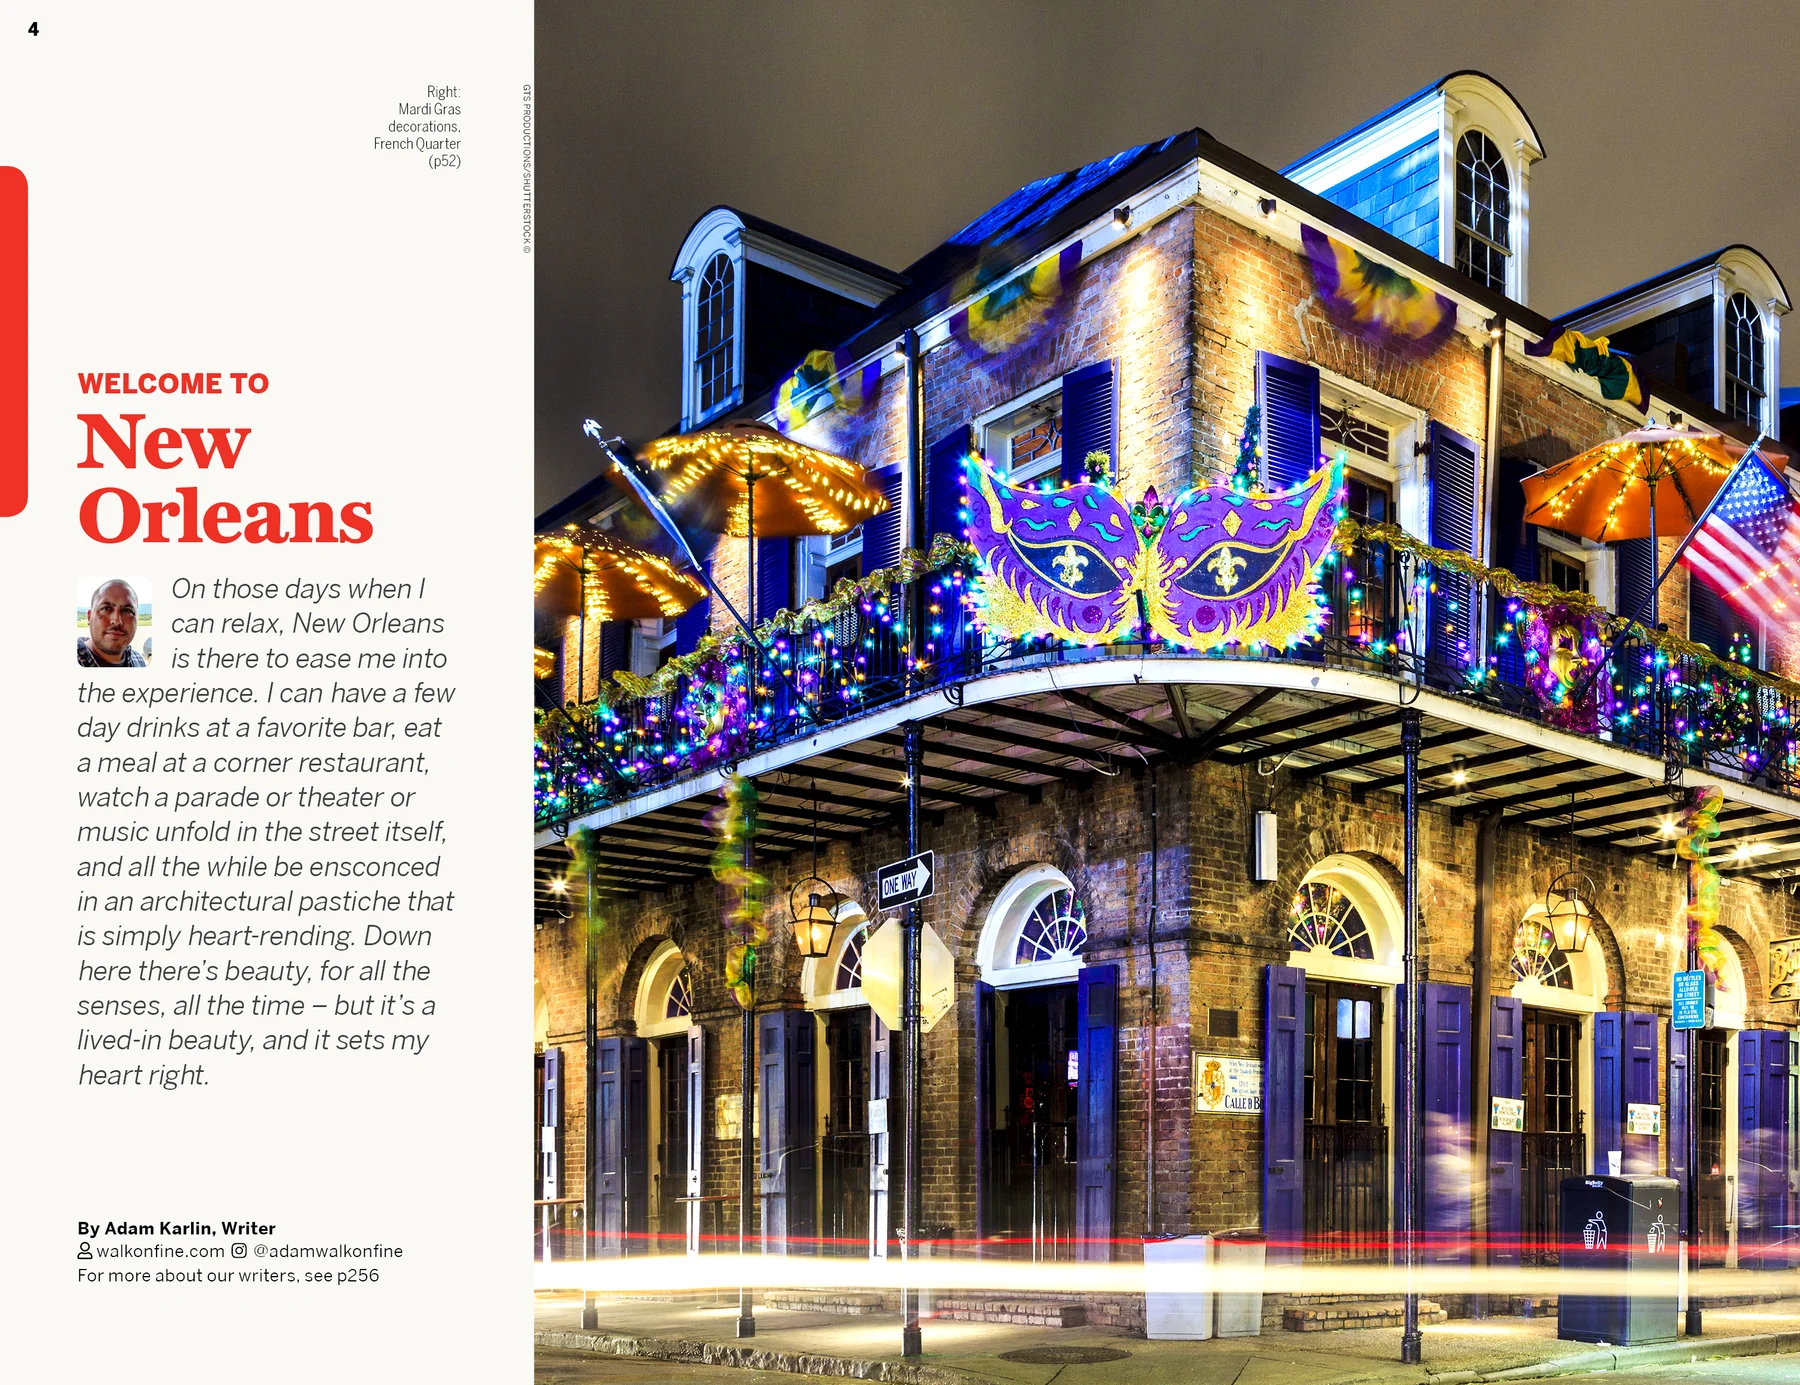 New Orleans Lonely Planet